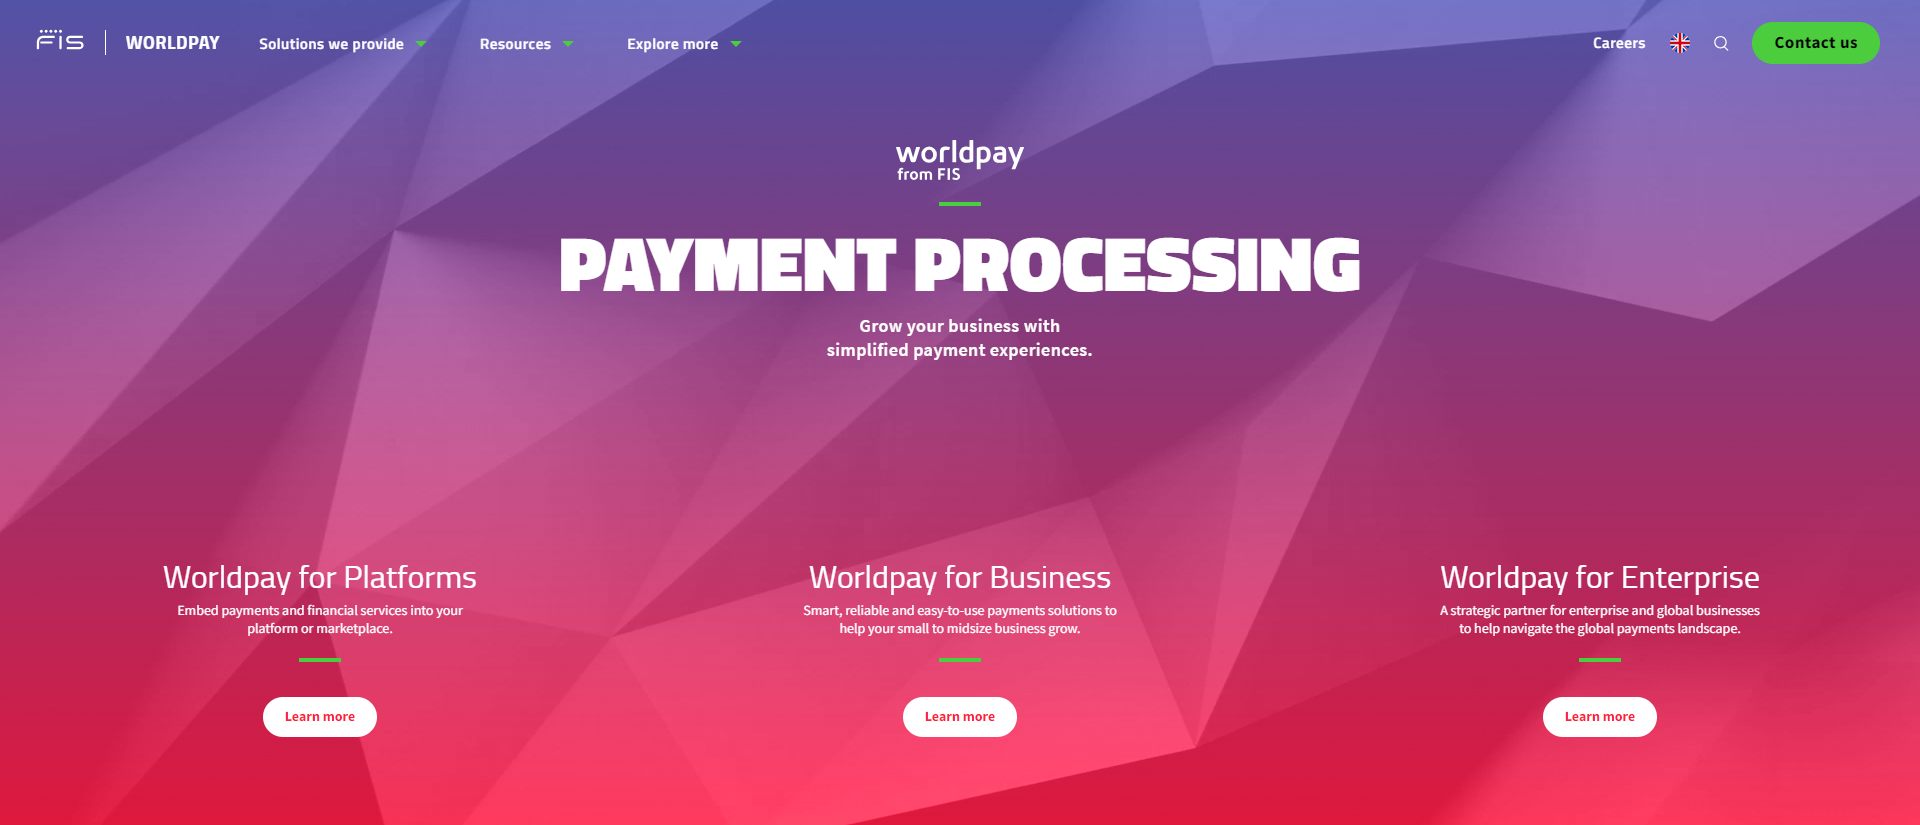 Shopify payment methods - Worldpay